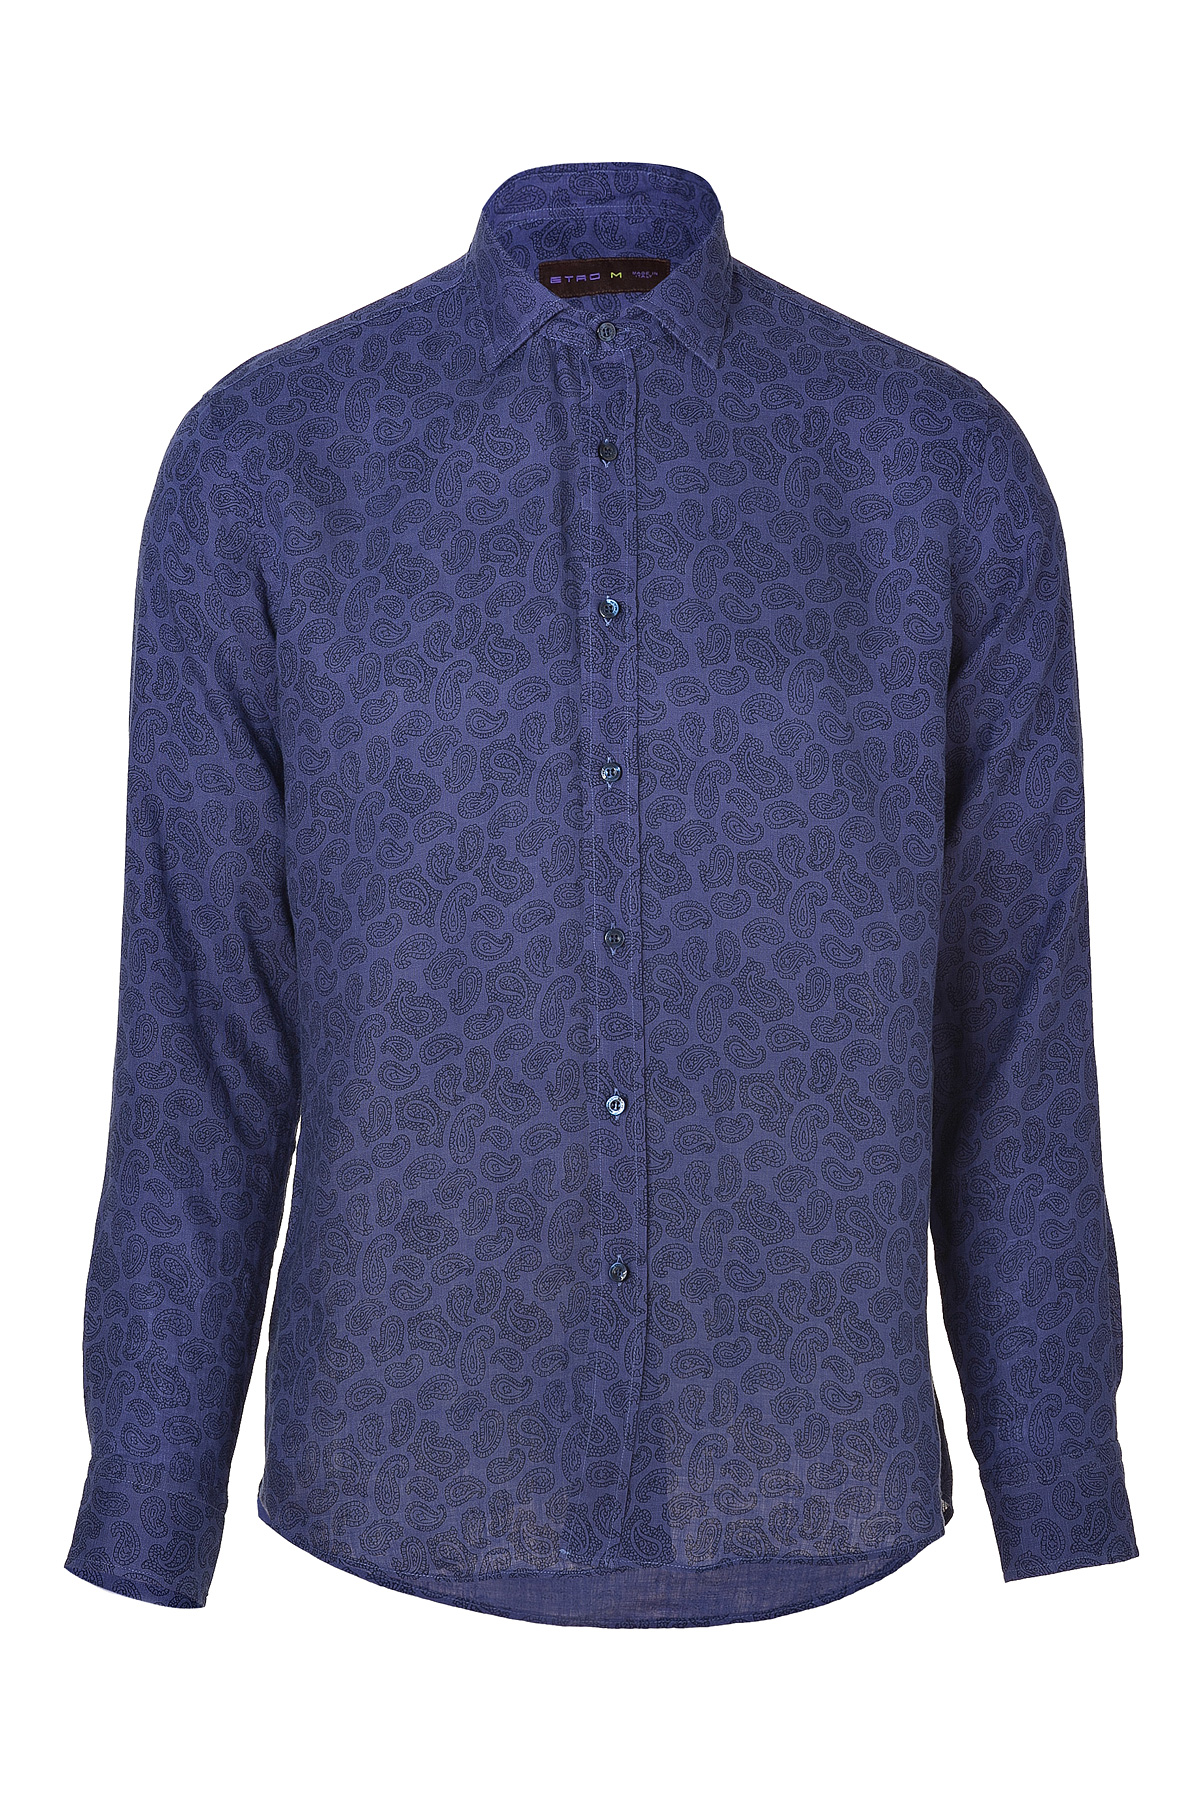 Etro Lilac Paisley Print Linen Shirt in Blue for Men (lilac) | Lyst